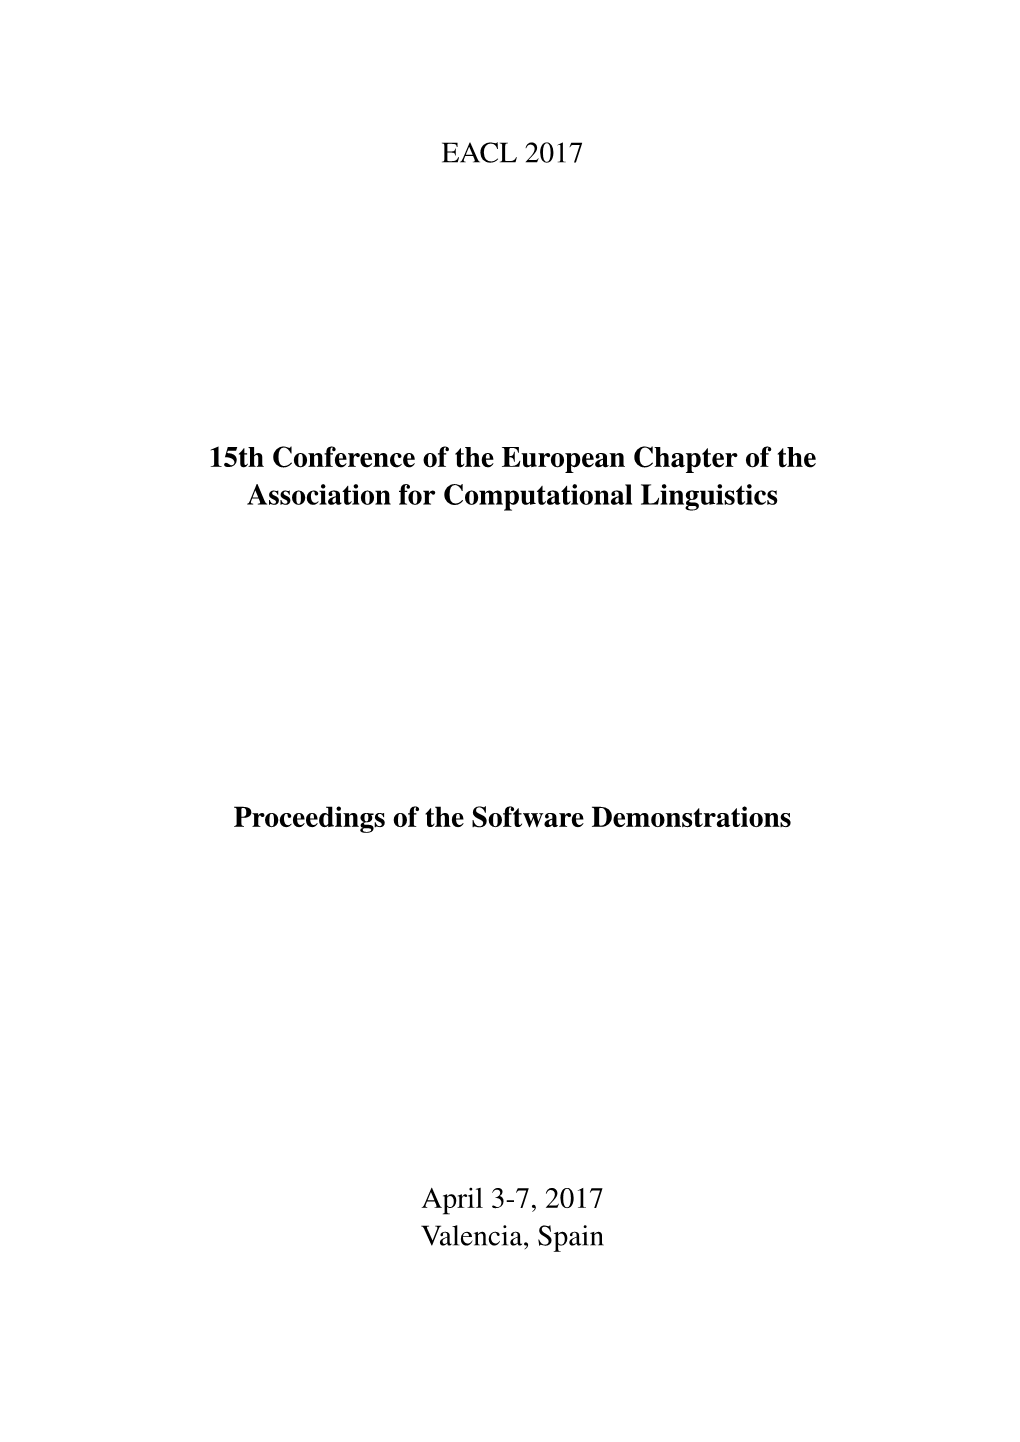 Proceedings of the Software Demonstrations, 15Th Conference of the European Chapter of the Association for Computational Linguis